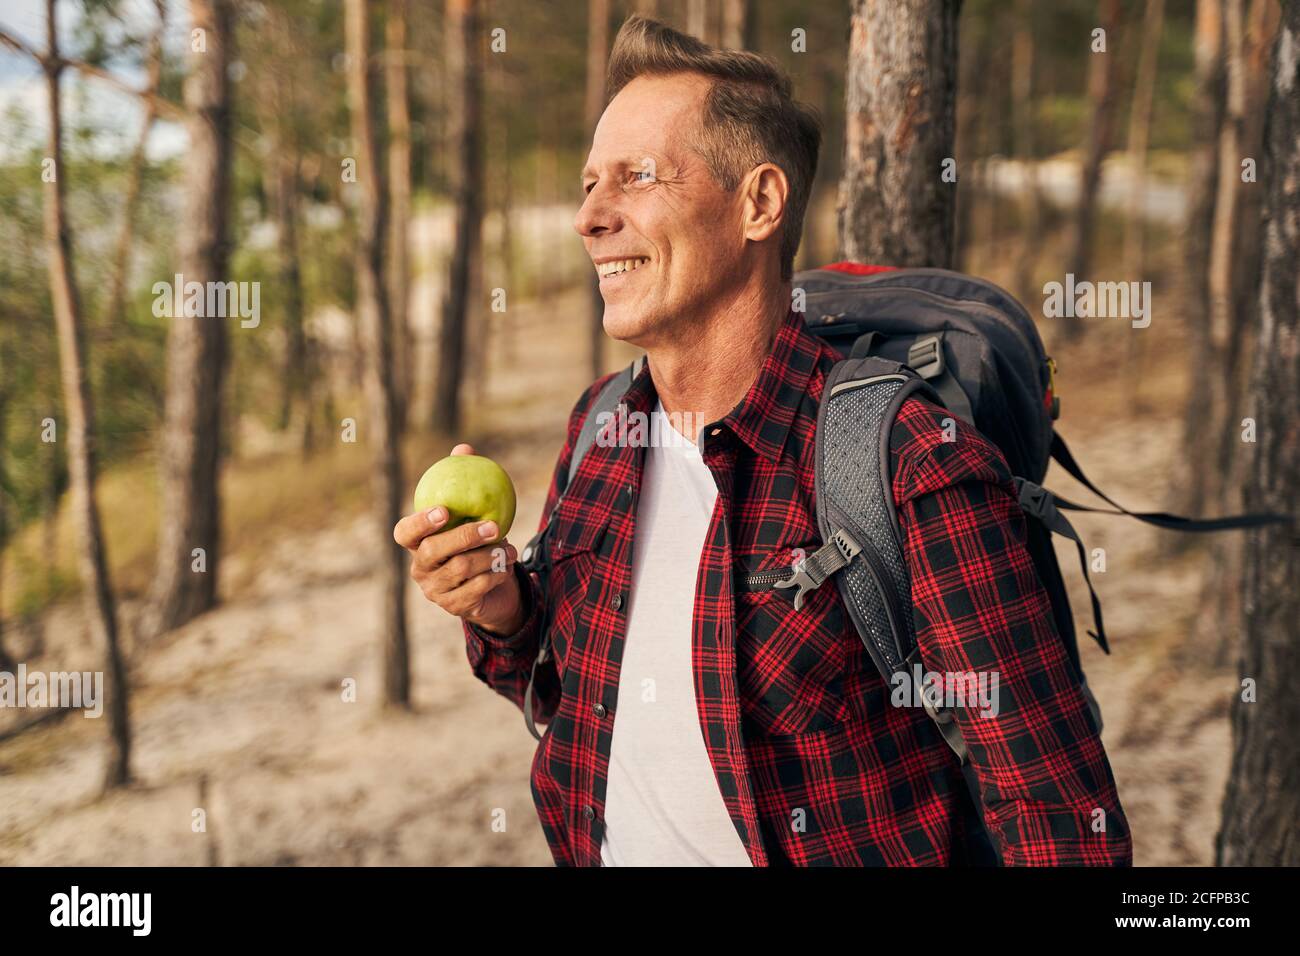 Hungry man eating apple while hiking in wood Stock Photo